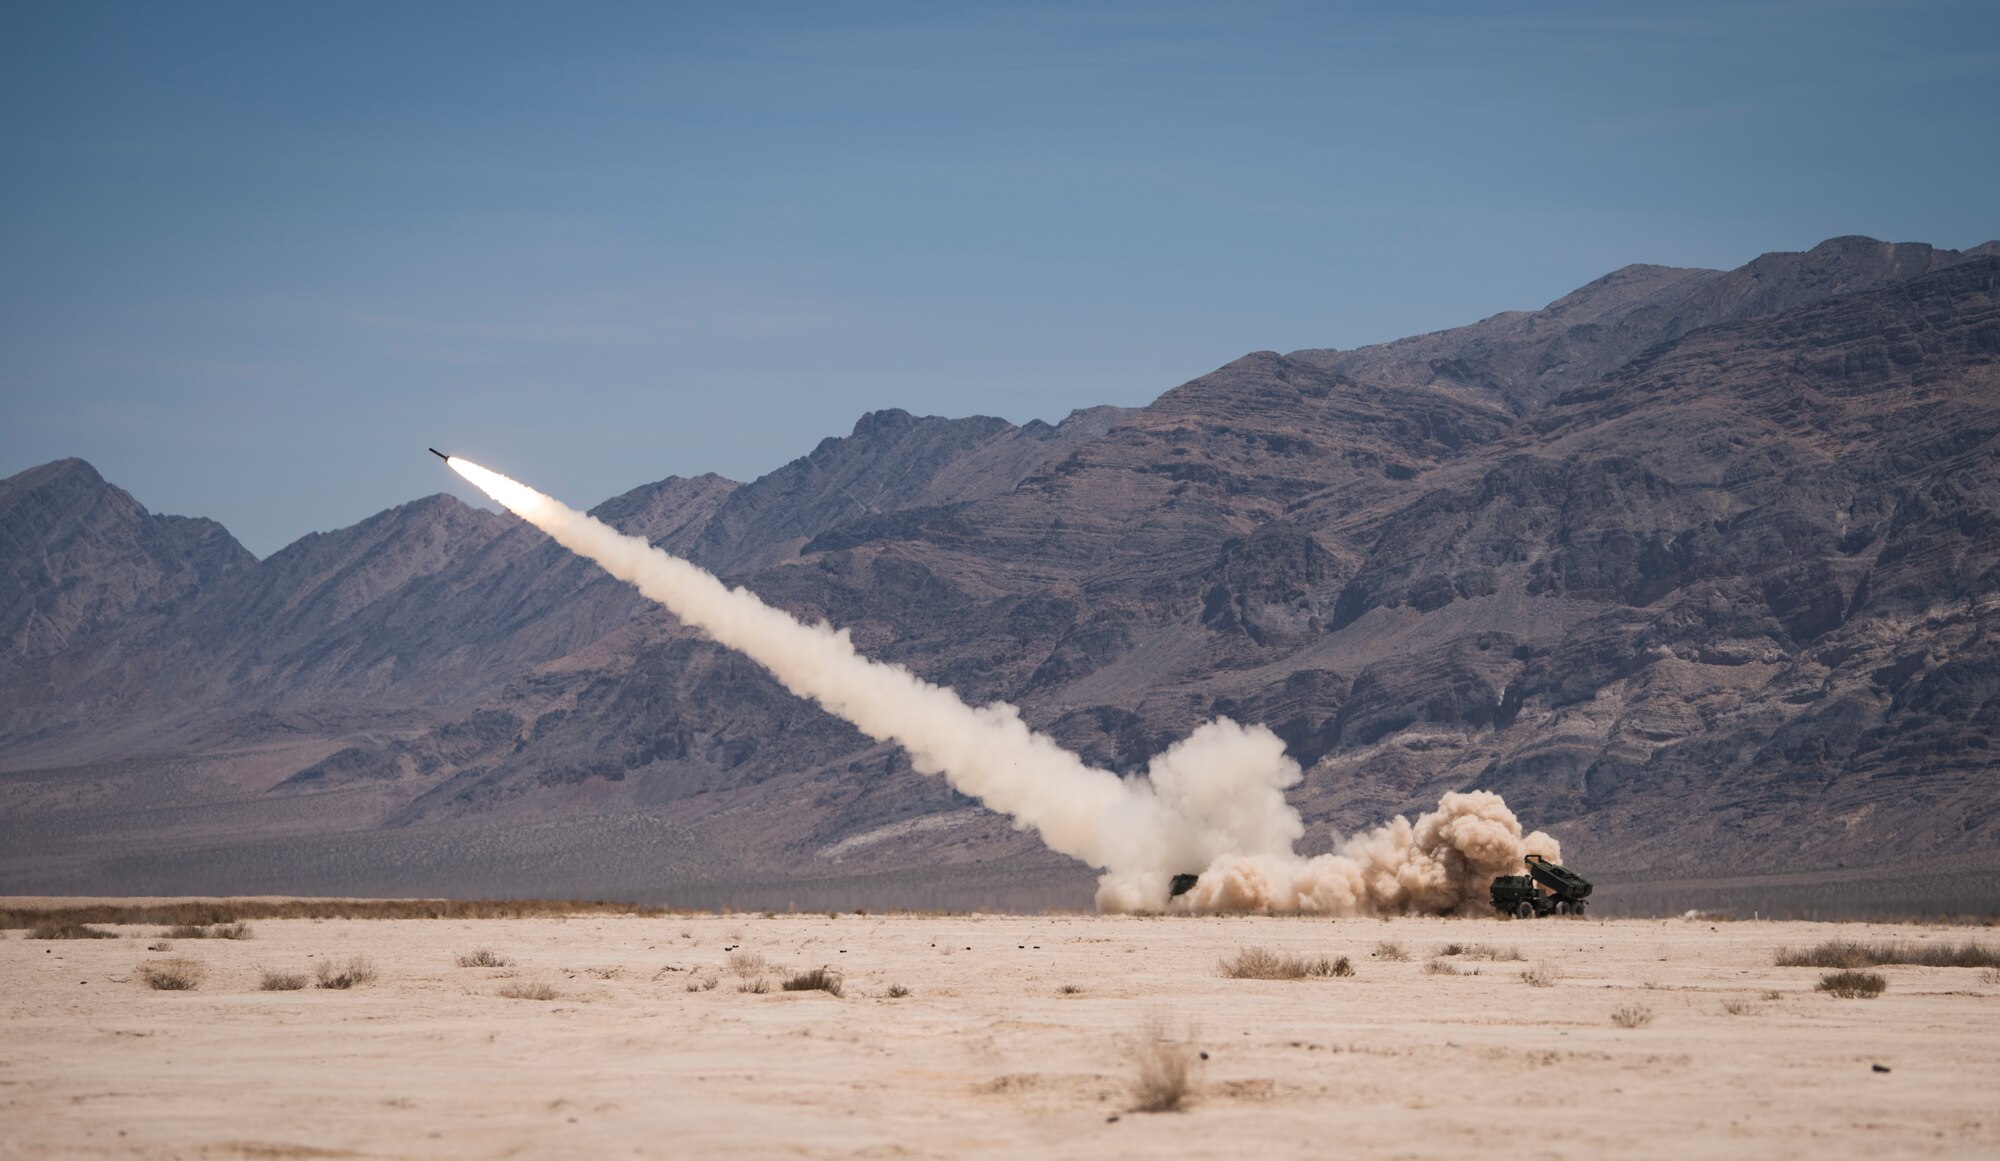 An M142 High Mobility Artillery Rocket System (HIMARS) assigned to 3rd Battalion, 321st Field Artillery Regiment, Fort Bragg, North Carolina, launches artillery at the Nevada Test and Training Range, June 9, 2018. The HIMARS is capable of being transported in anything from a C-130 Hercules cargo aircraft to a C-5 Galaxy cargo aircraft. (U.S. Air Force photo by Airman 1st Class Andrew D. Sarver)